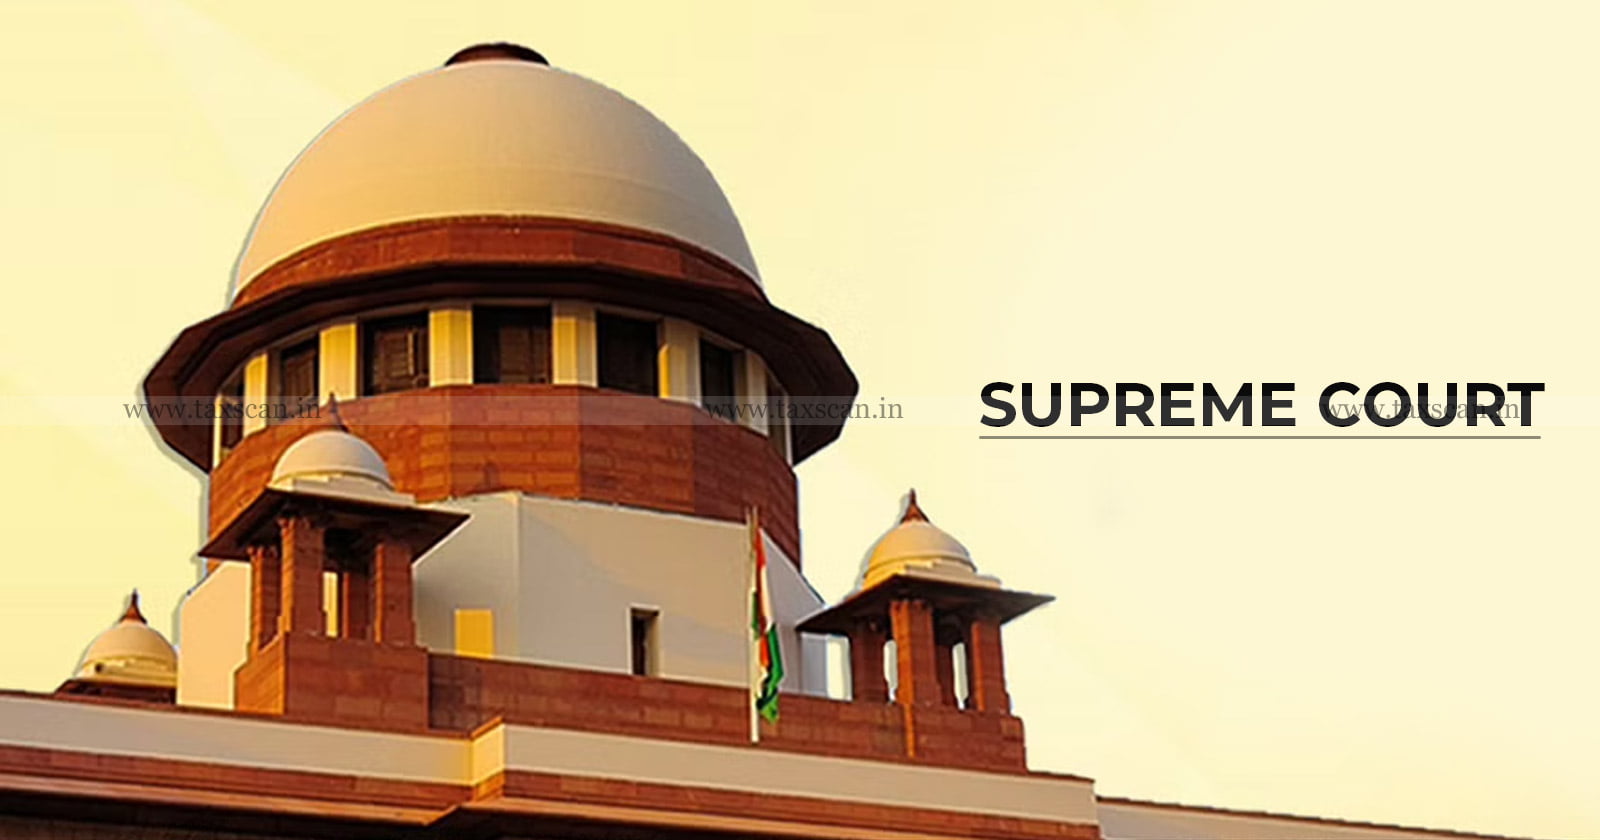 Supreme Court - GST - search and seizure - Voluntary GST payment - Supreme Court on GST recovery - taxscan